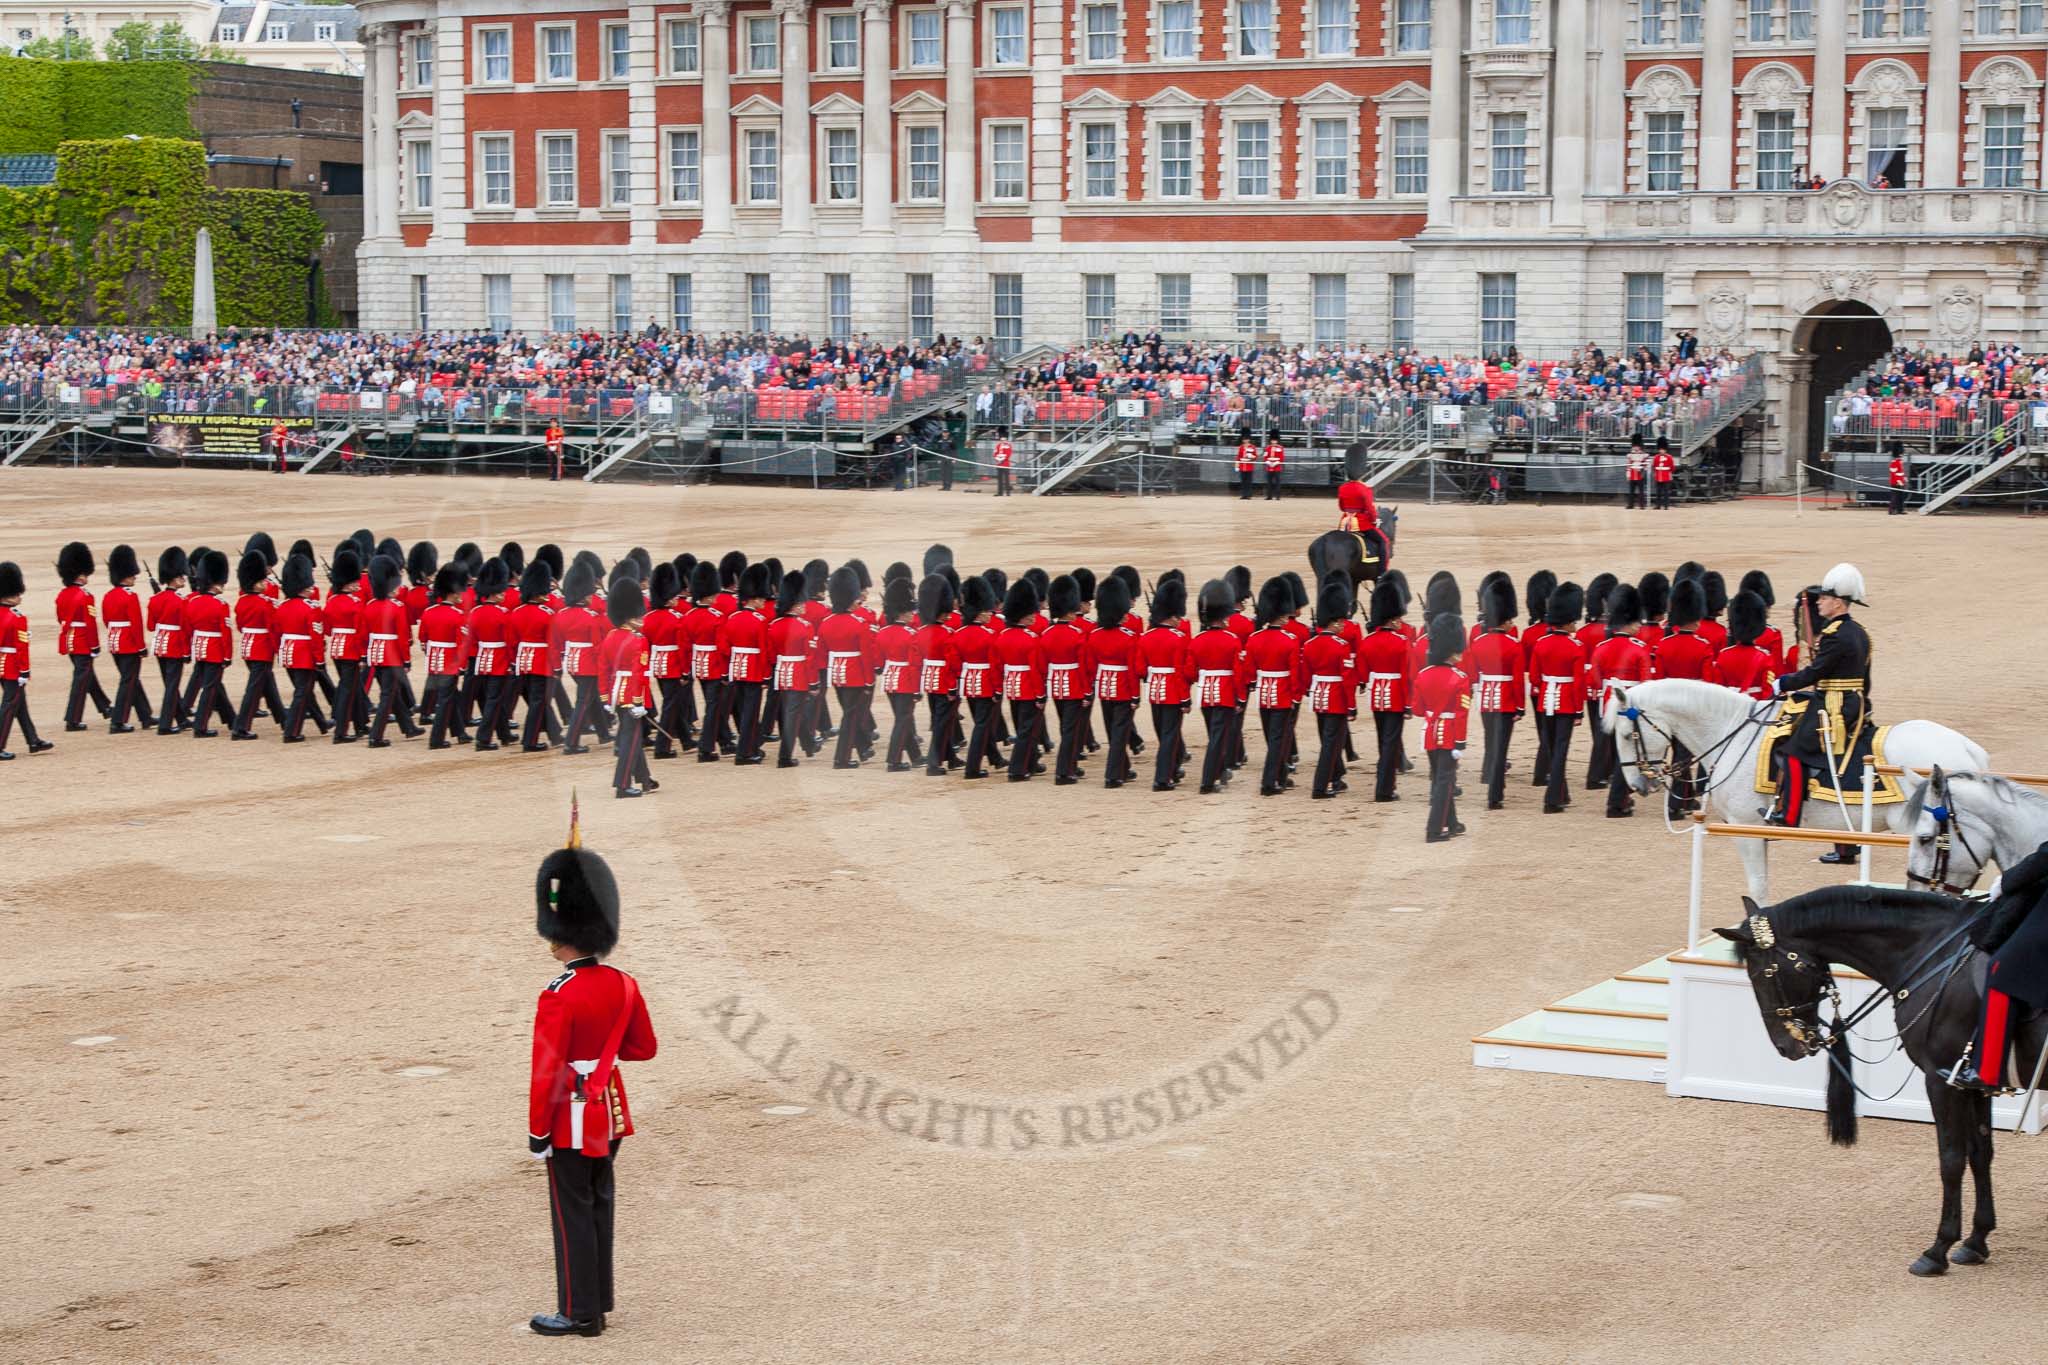 Major General's Review 2013: No.1 Guard, 1st Battalion Welsh Guards, during the March Past..
Horse Guards Parade, Westminster,
London SW1,

United Kingdom,
on 01 June 2013 at 11:35, image #497